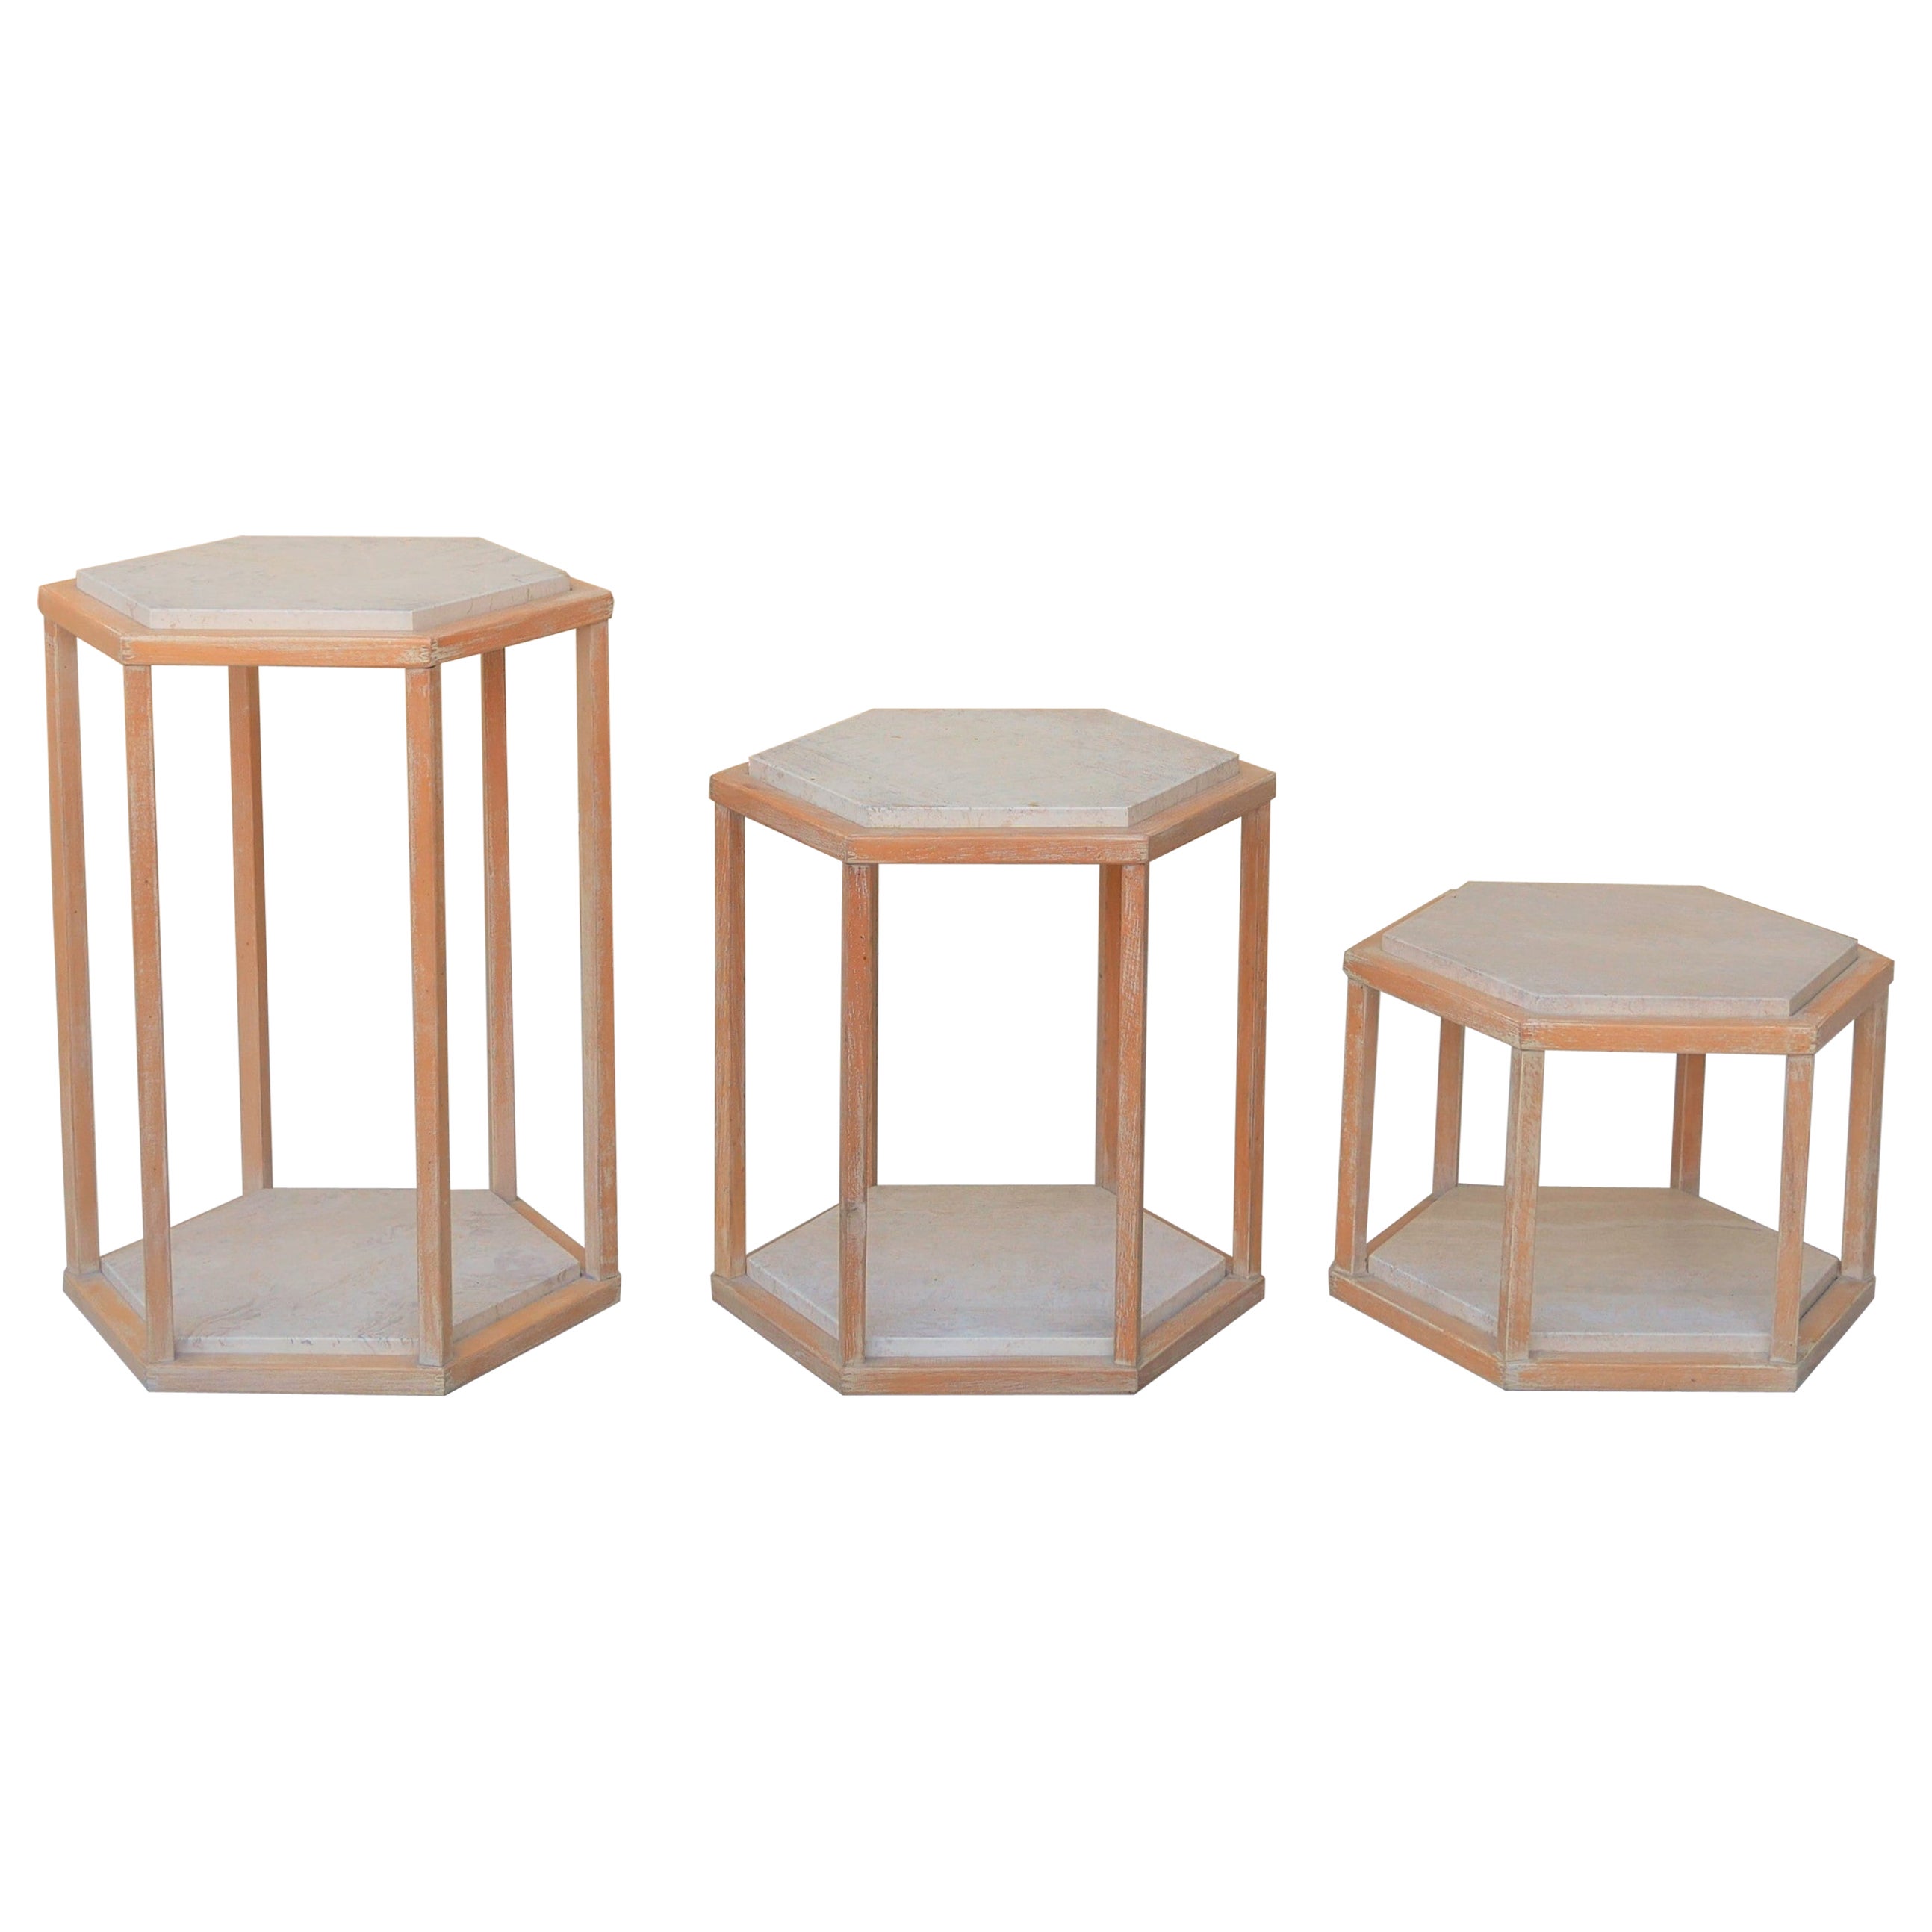 Series of 3 Vintage Coffee Tables in Travertine and Wood by Roche Bobois Edition For Sale